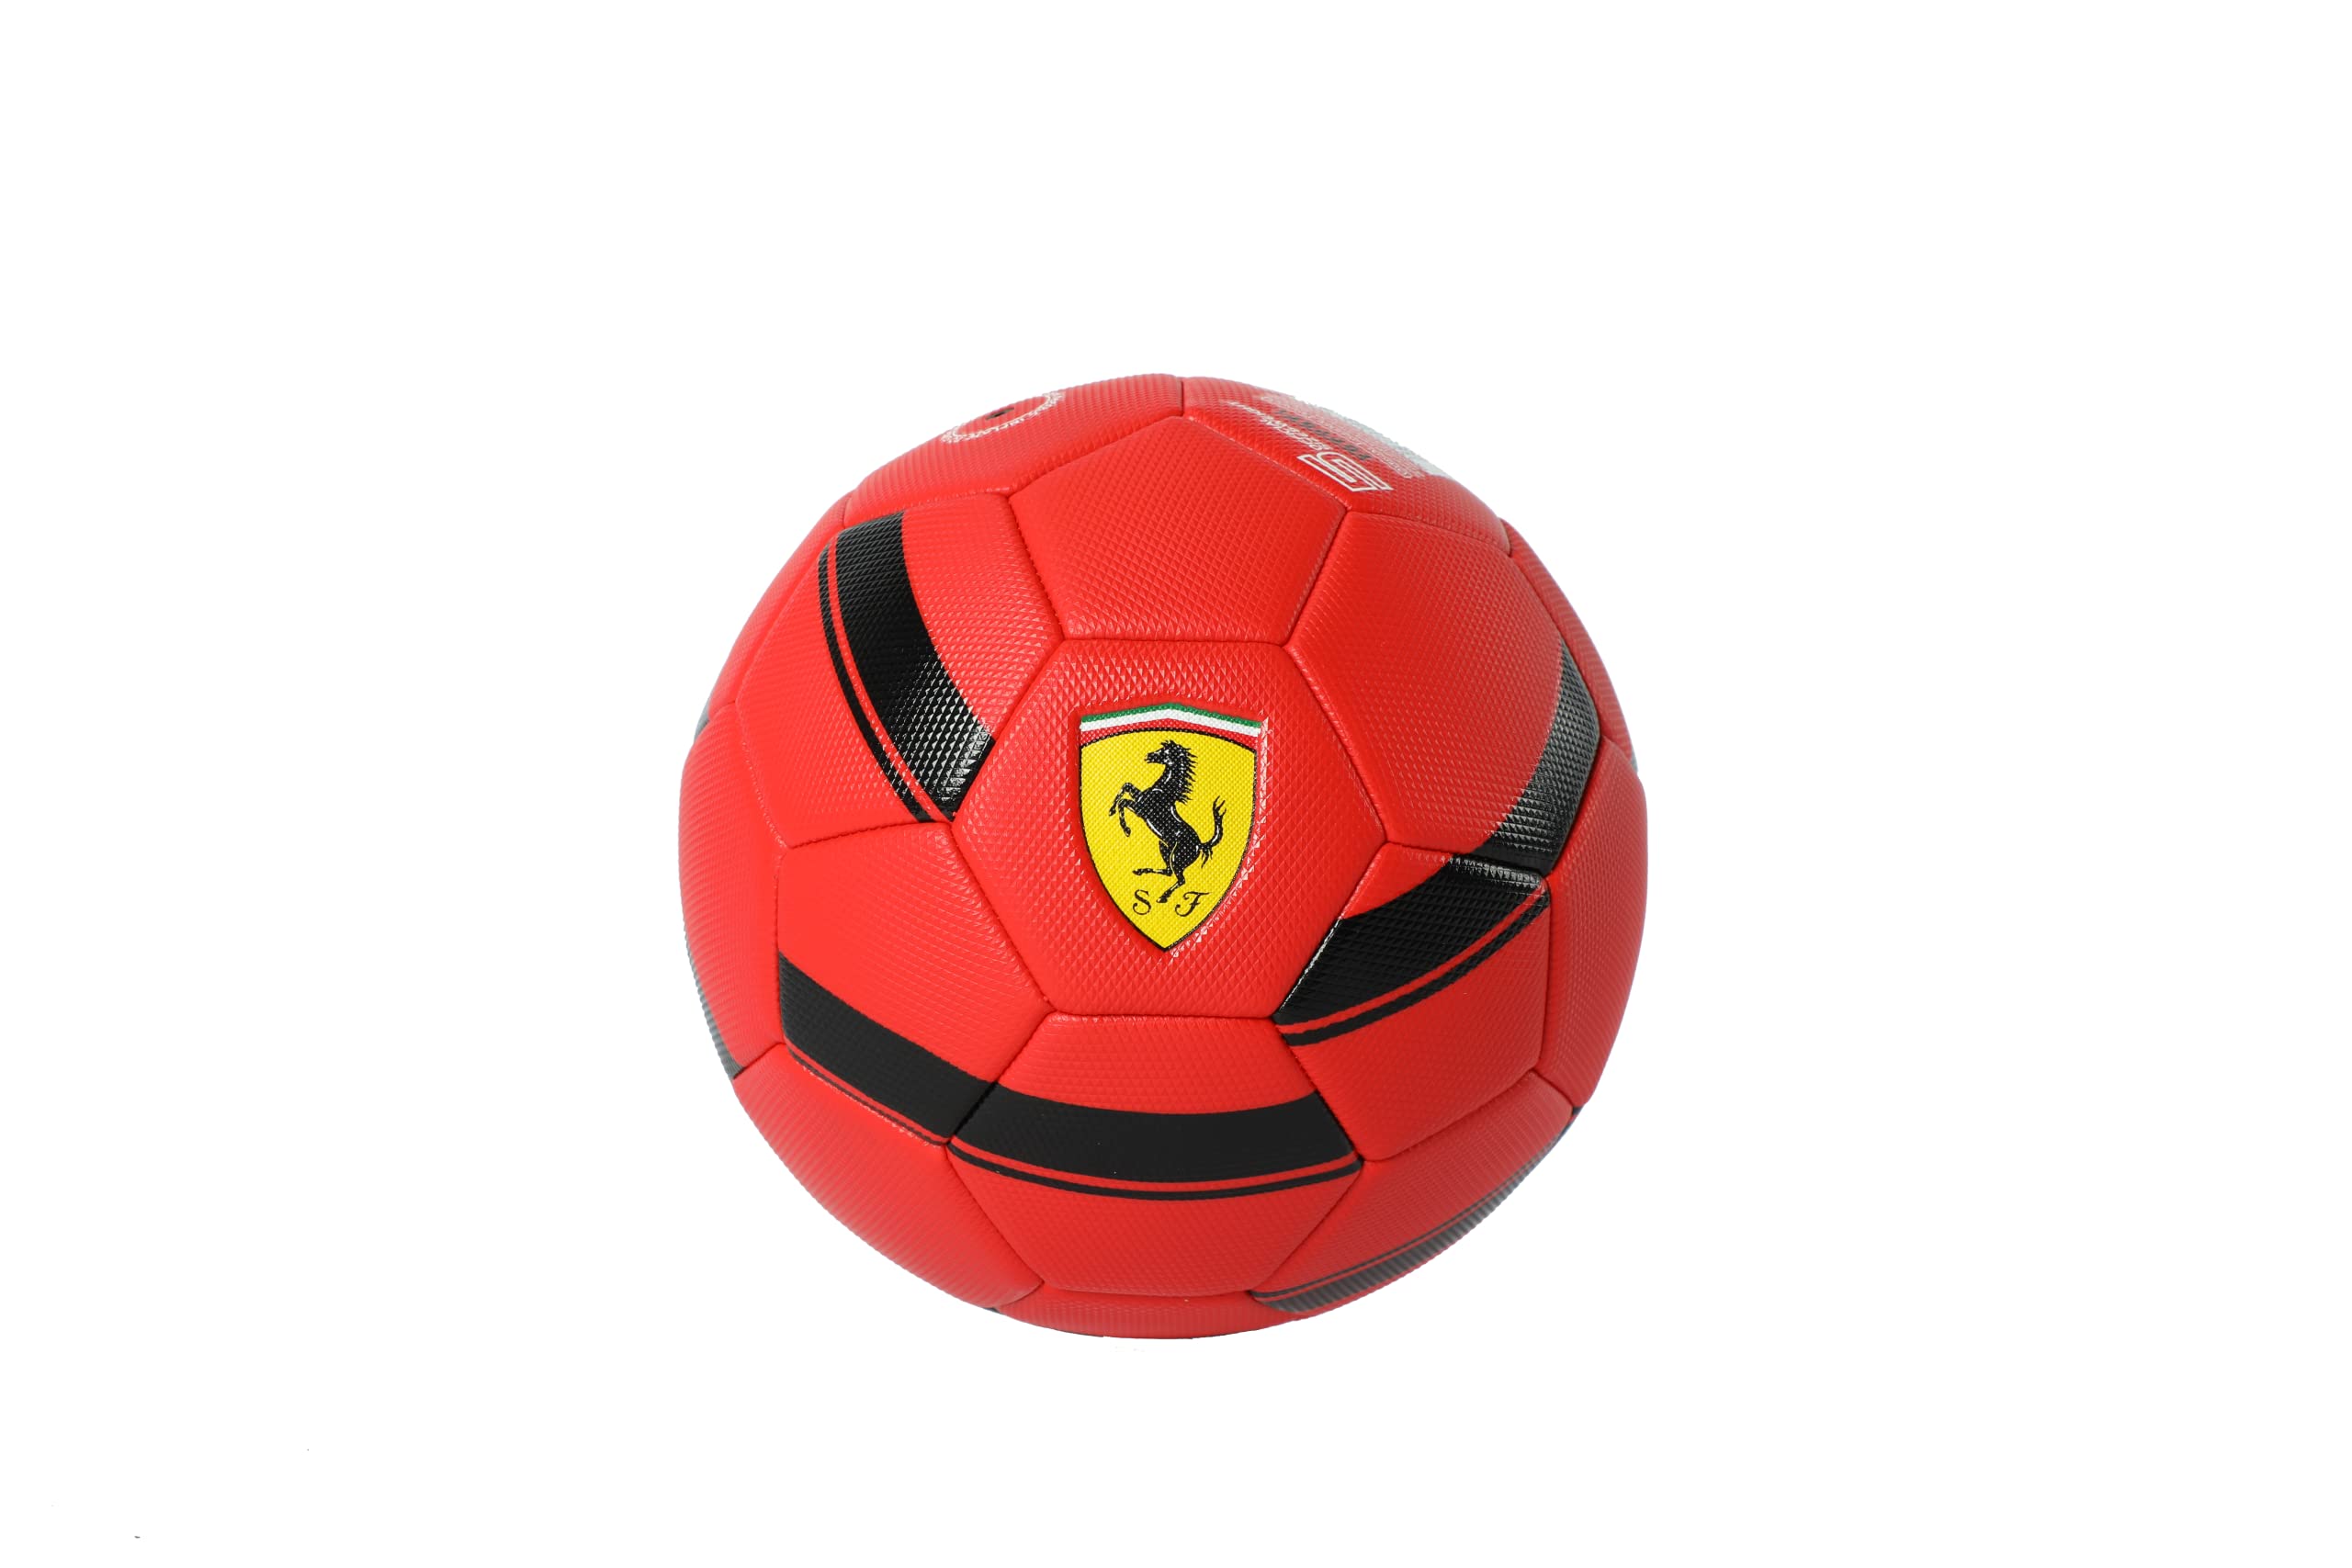 DAKOTT Ferrari Limited Edition Soccer Ball (Red, Size 5) $13.13 + Free Shipping w/ Prime or on $35+